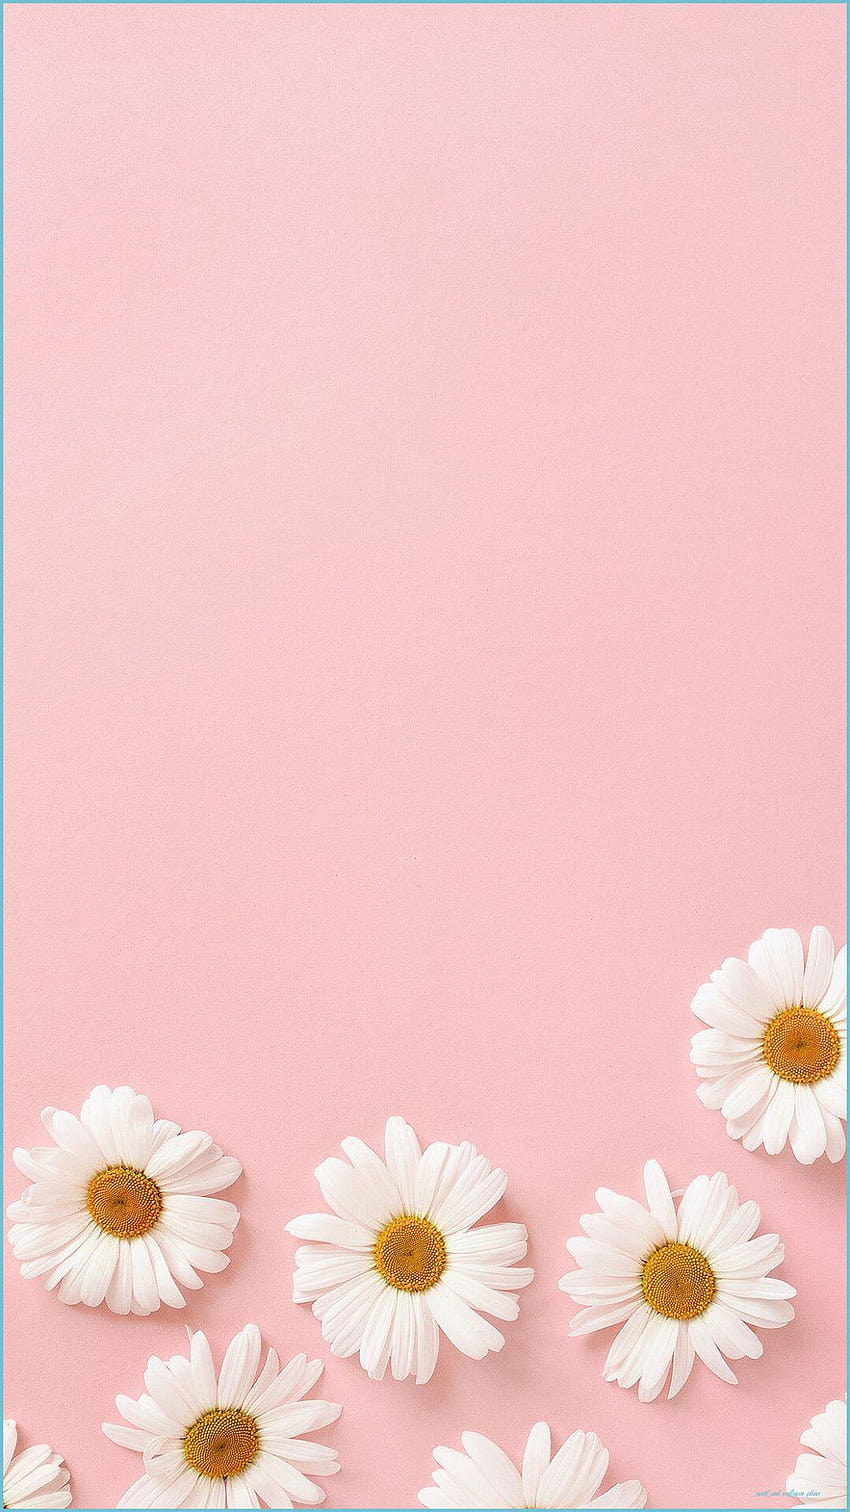 Pastel pink acrylic paint phone wallpaper background  free image by  rawpixelcom  nun  Pink wallpaper girly Pastel pink wallpaper iphone Pink  wallpaper iphone